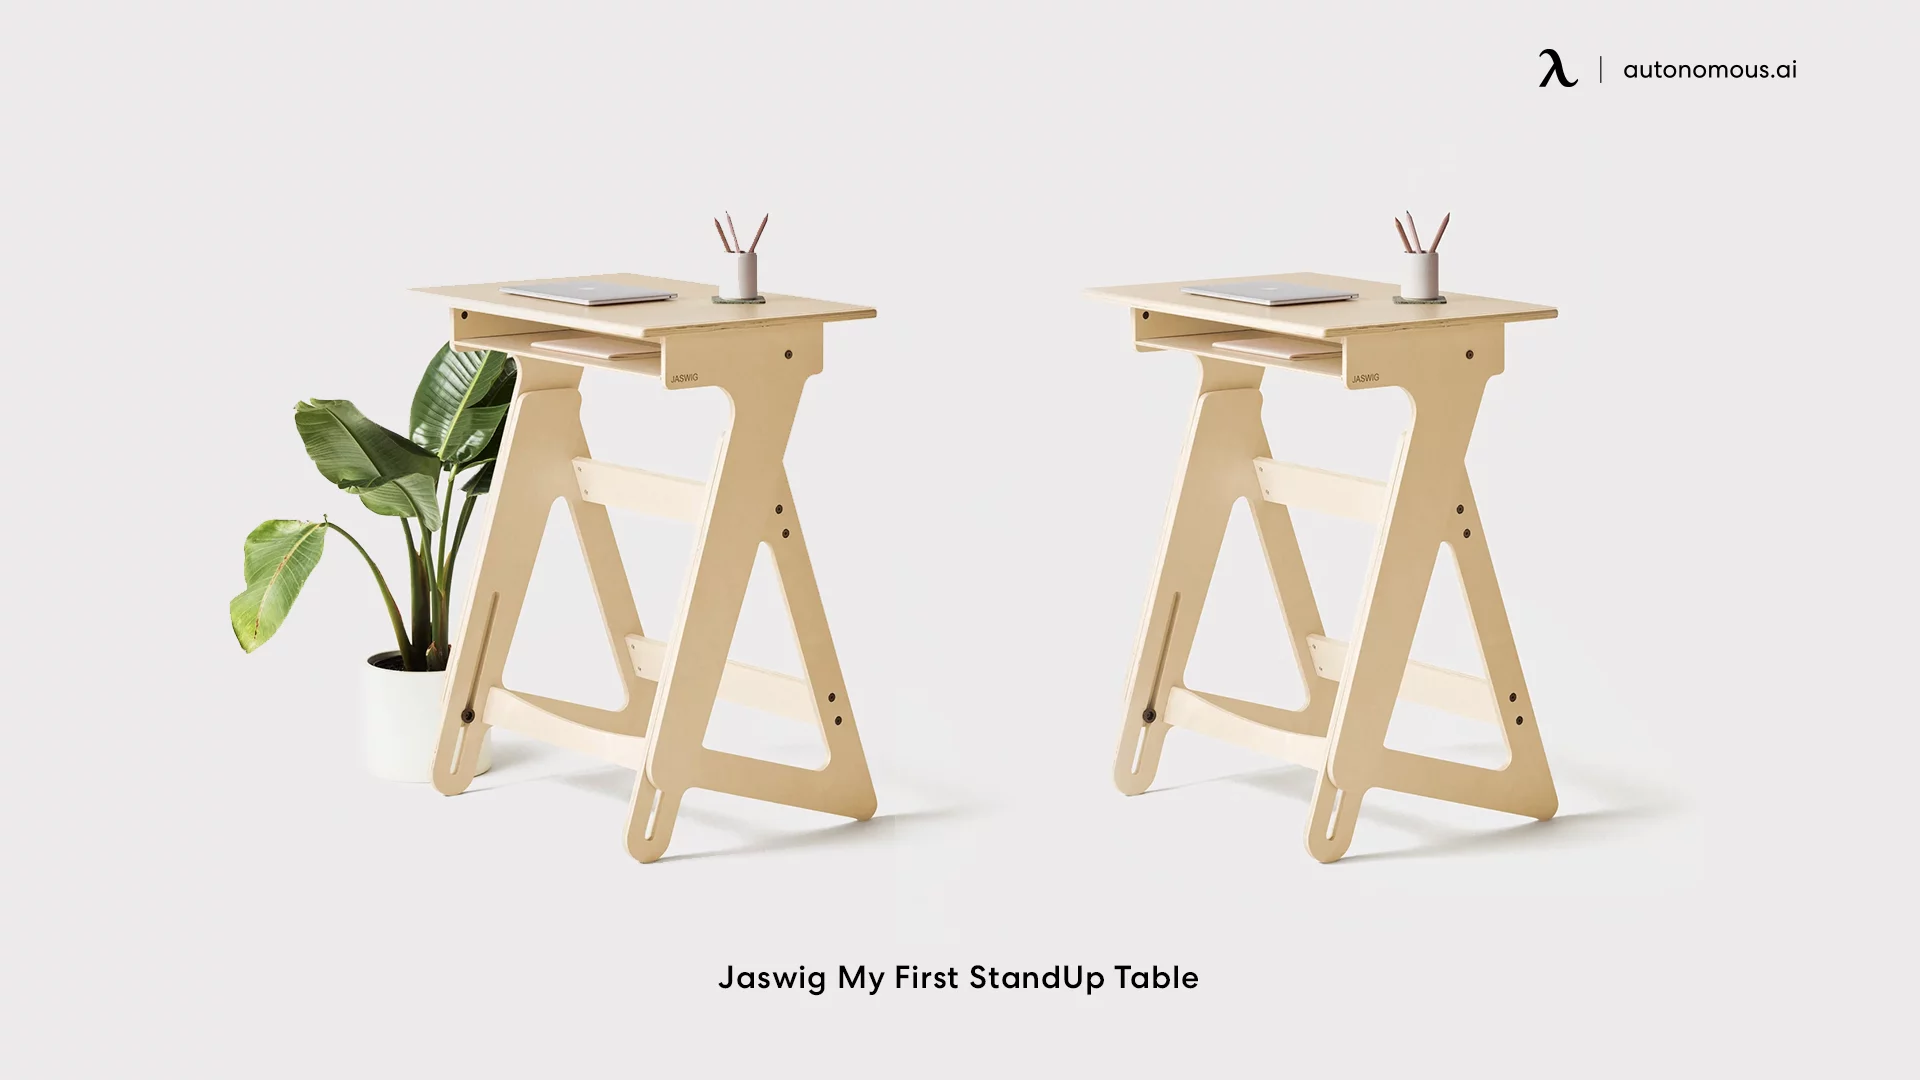 Jaswig My First StandUp Table